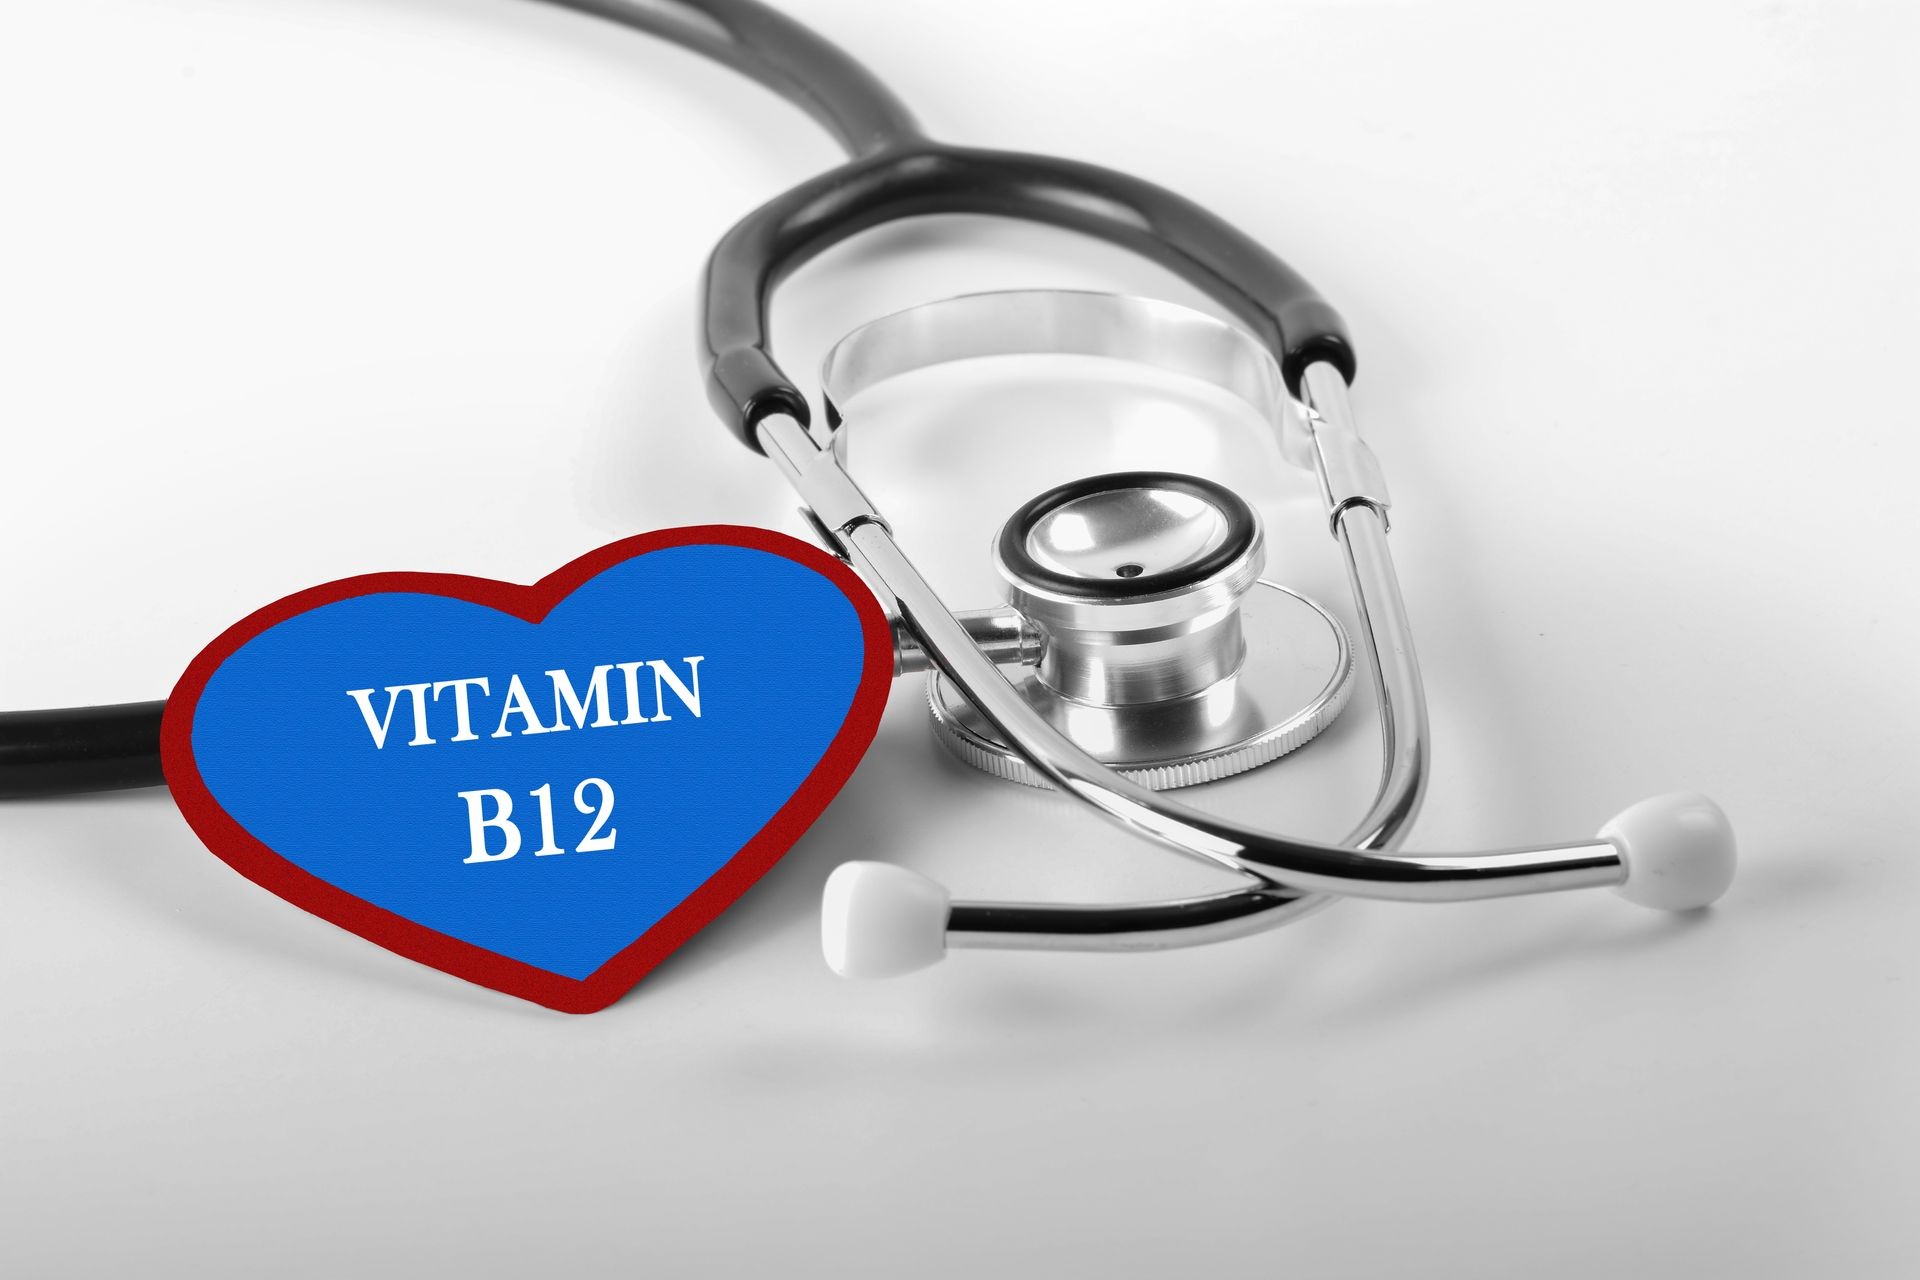 Black and white Stethoscope and red love with medical conceptual text "VITAMIN B12"